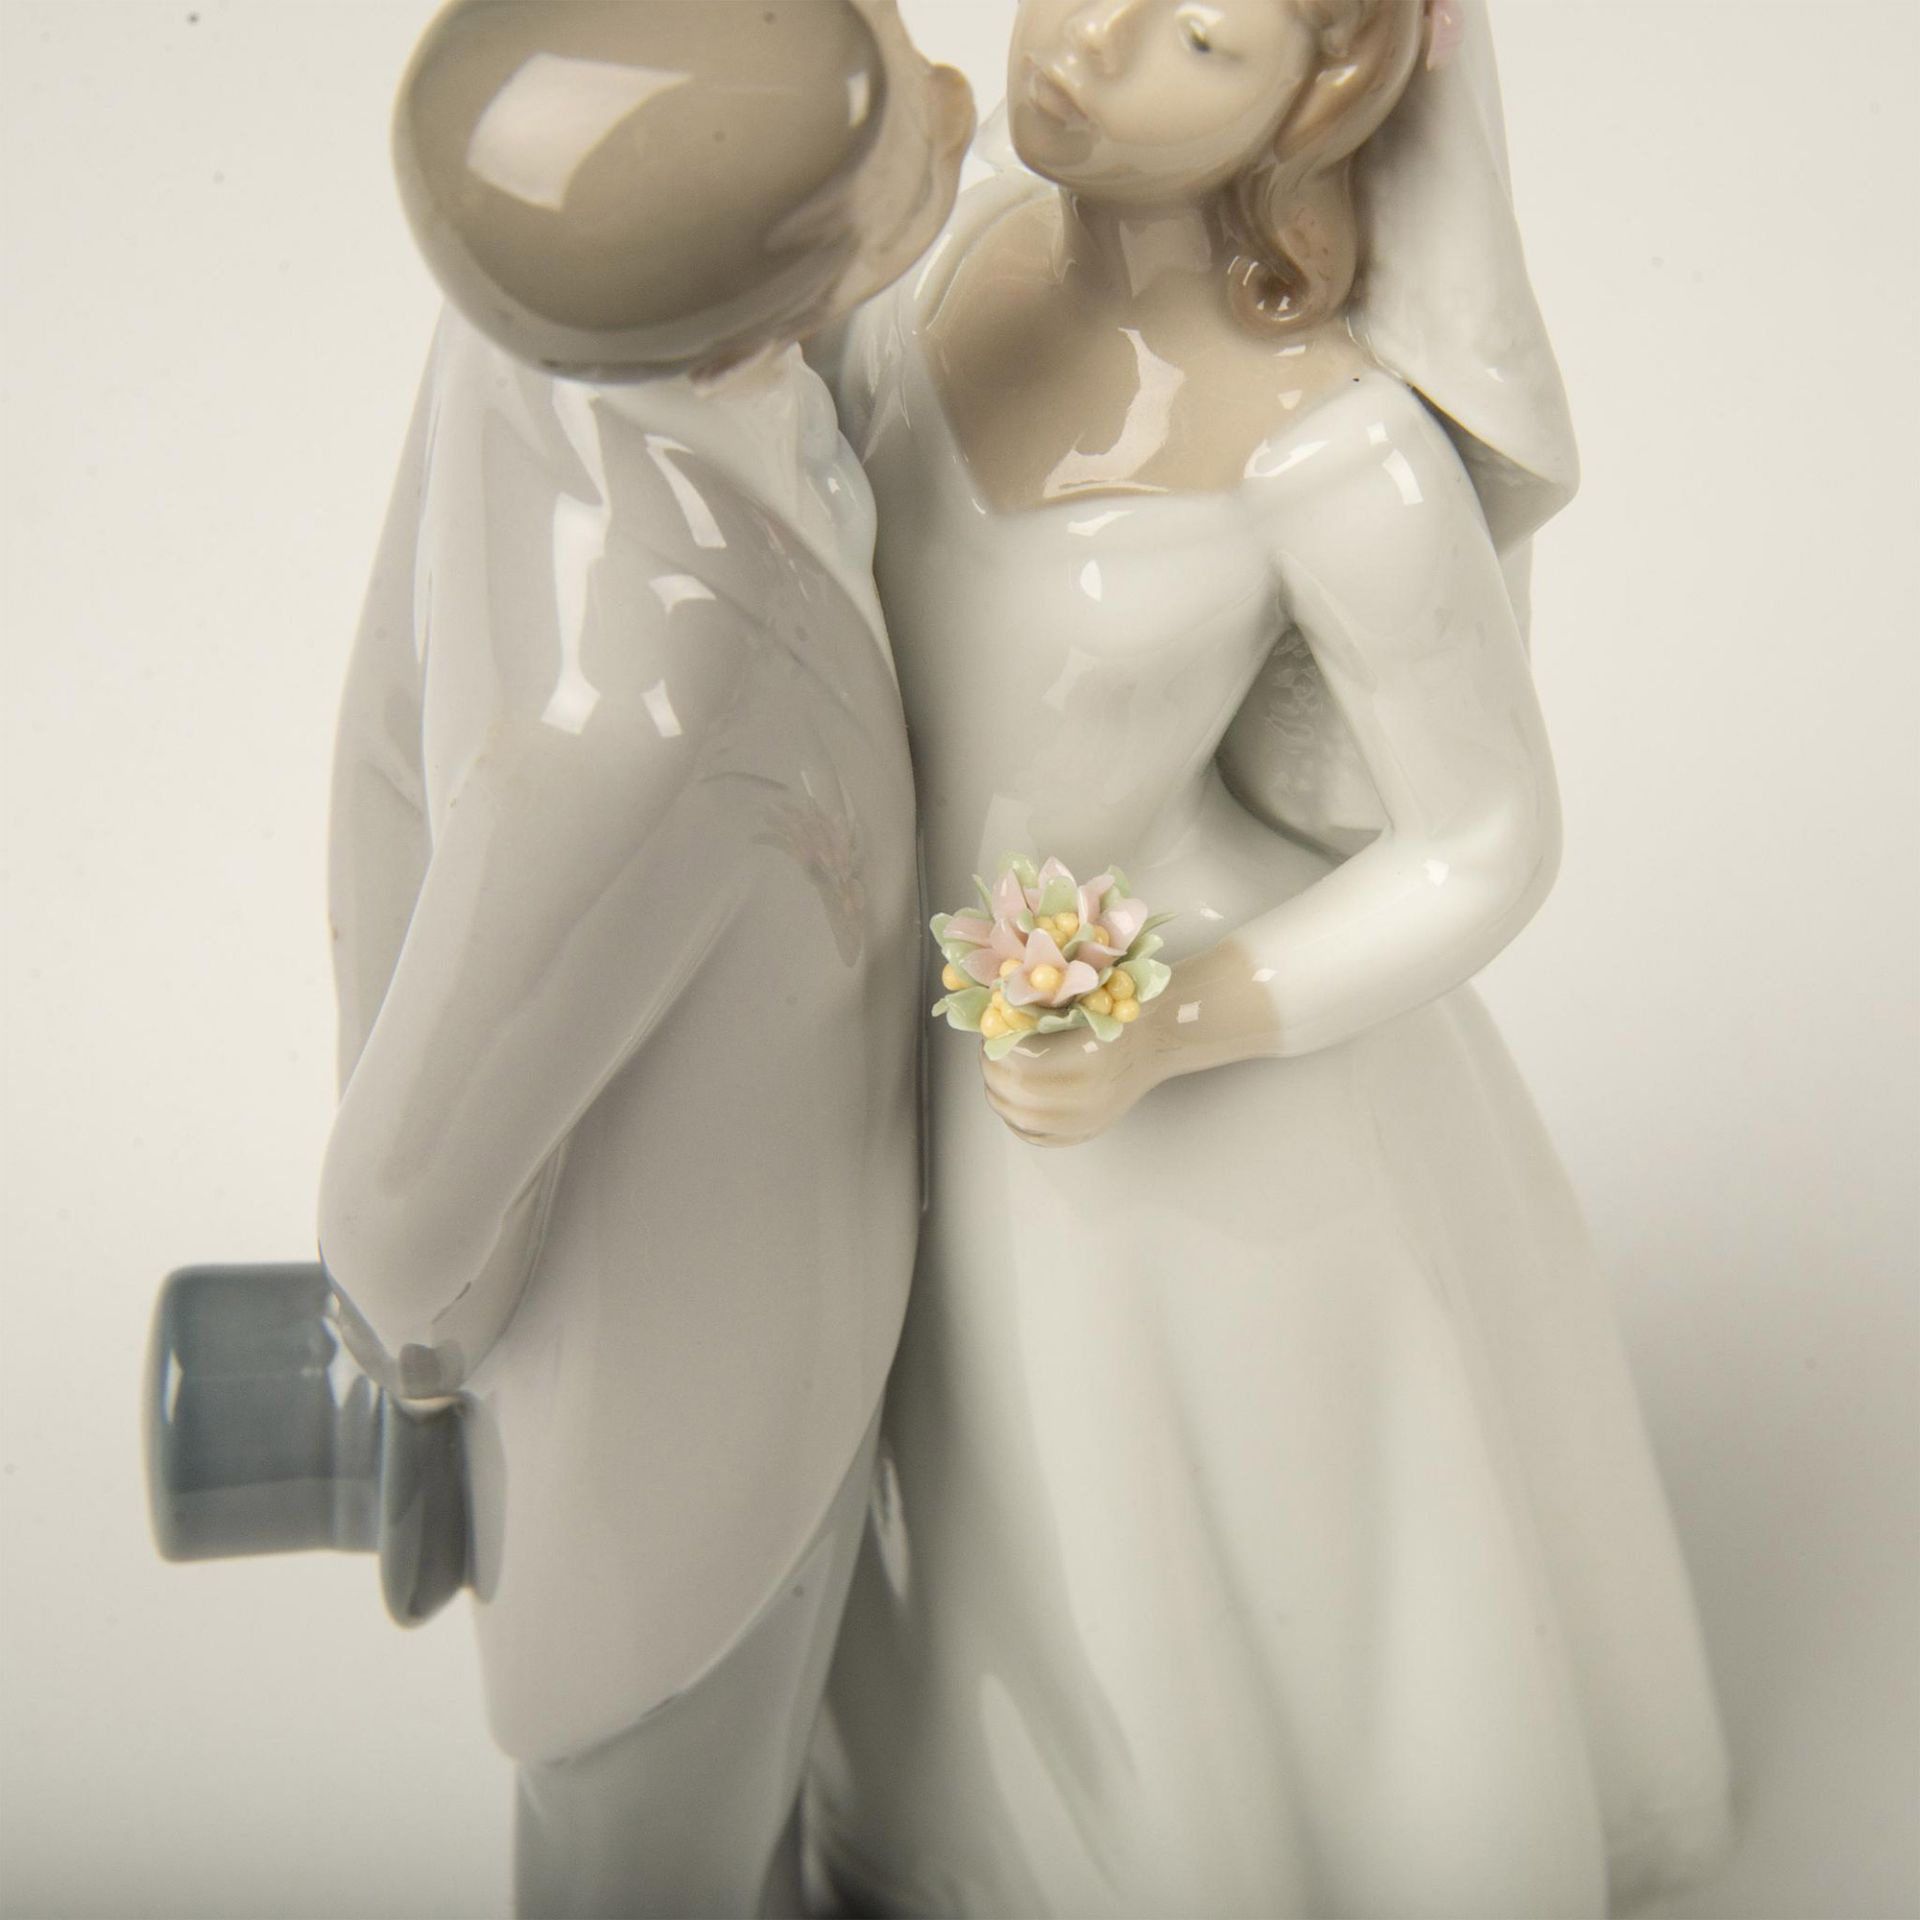 Lladro Porcelain Figurine, A Kiss to Remember 1006620 - Image 4 of 4